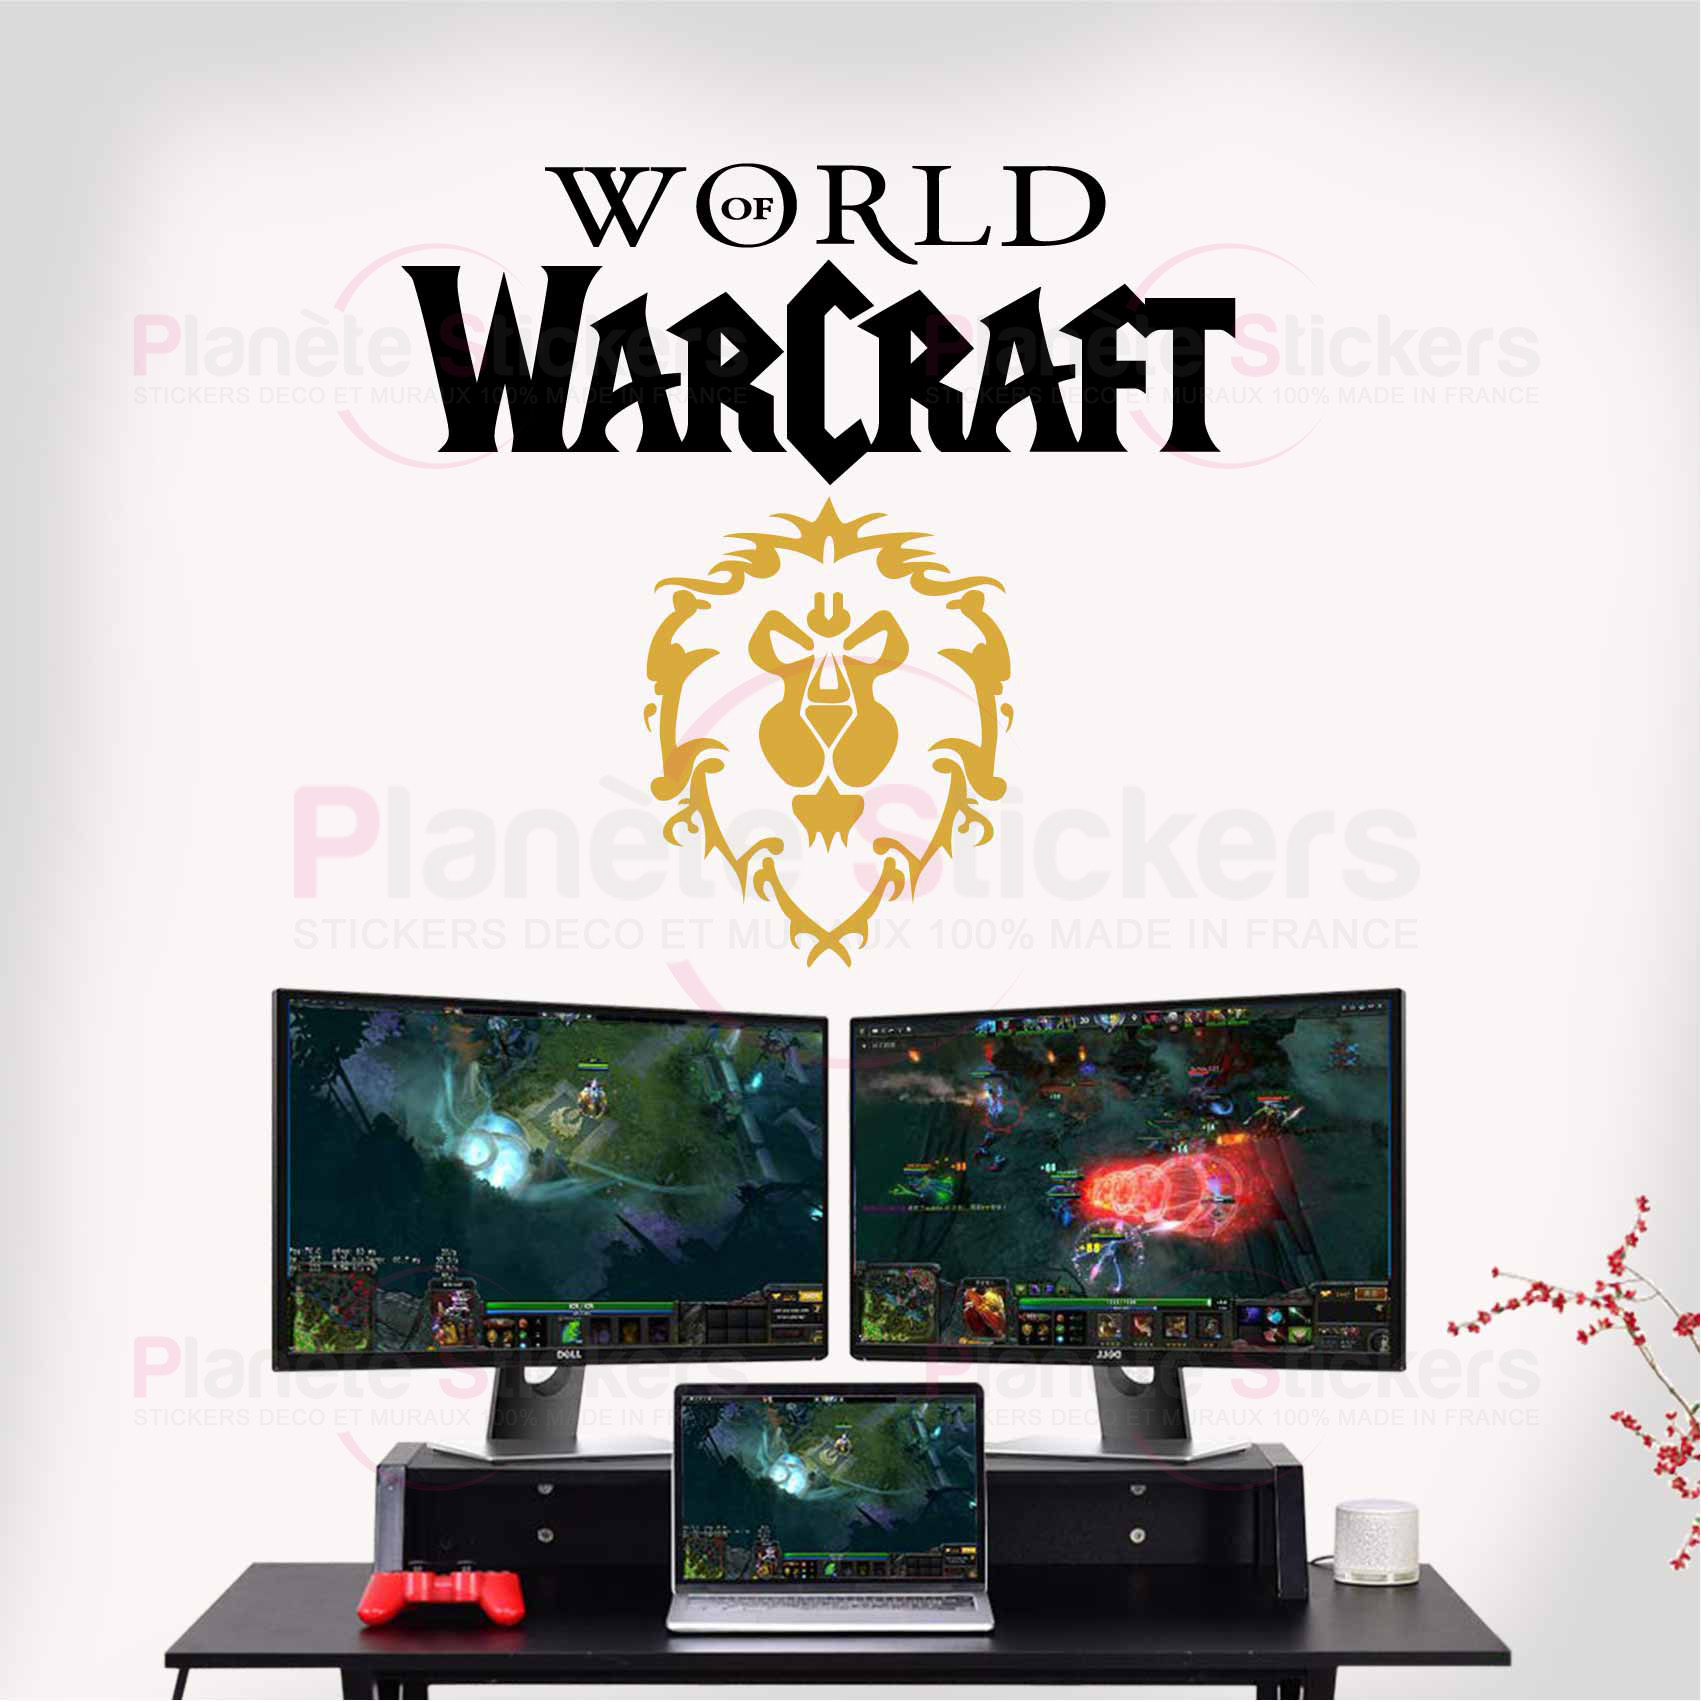 stickers-alliance-world-of-warcraft-ref18wow-stickers-muraux-world-of-warcraft-autocollant-mural-jeux-video-sticker-gamer-deco-gaming-salon-chambre